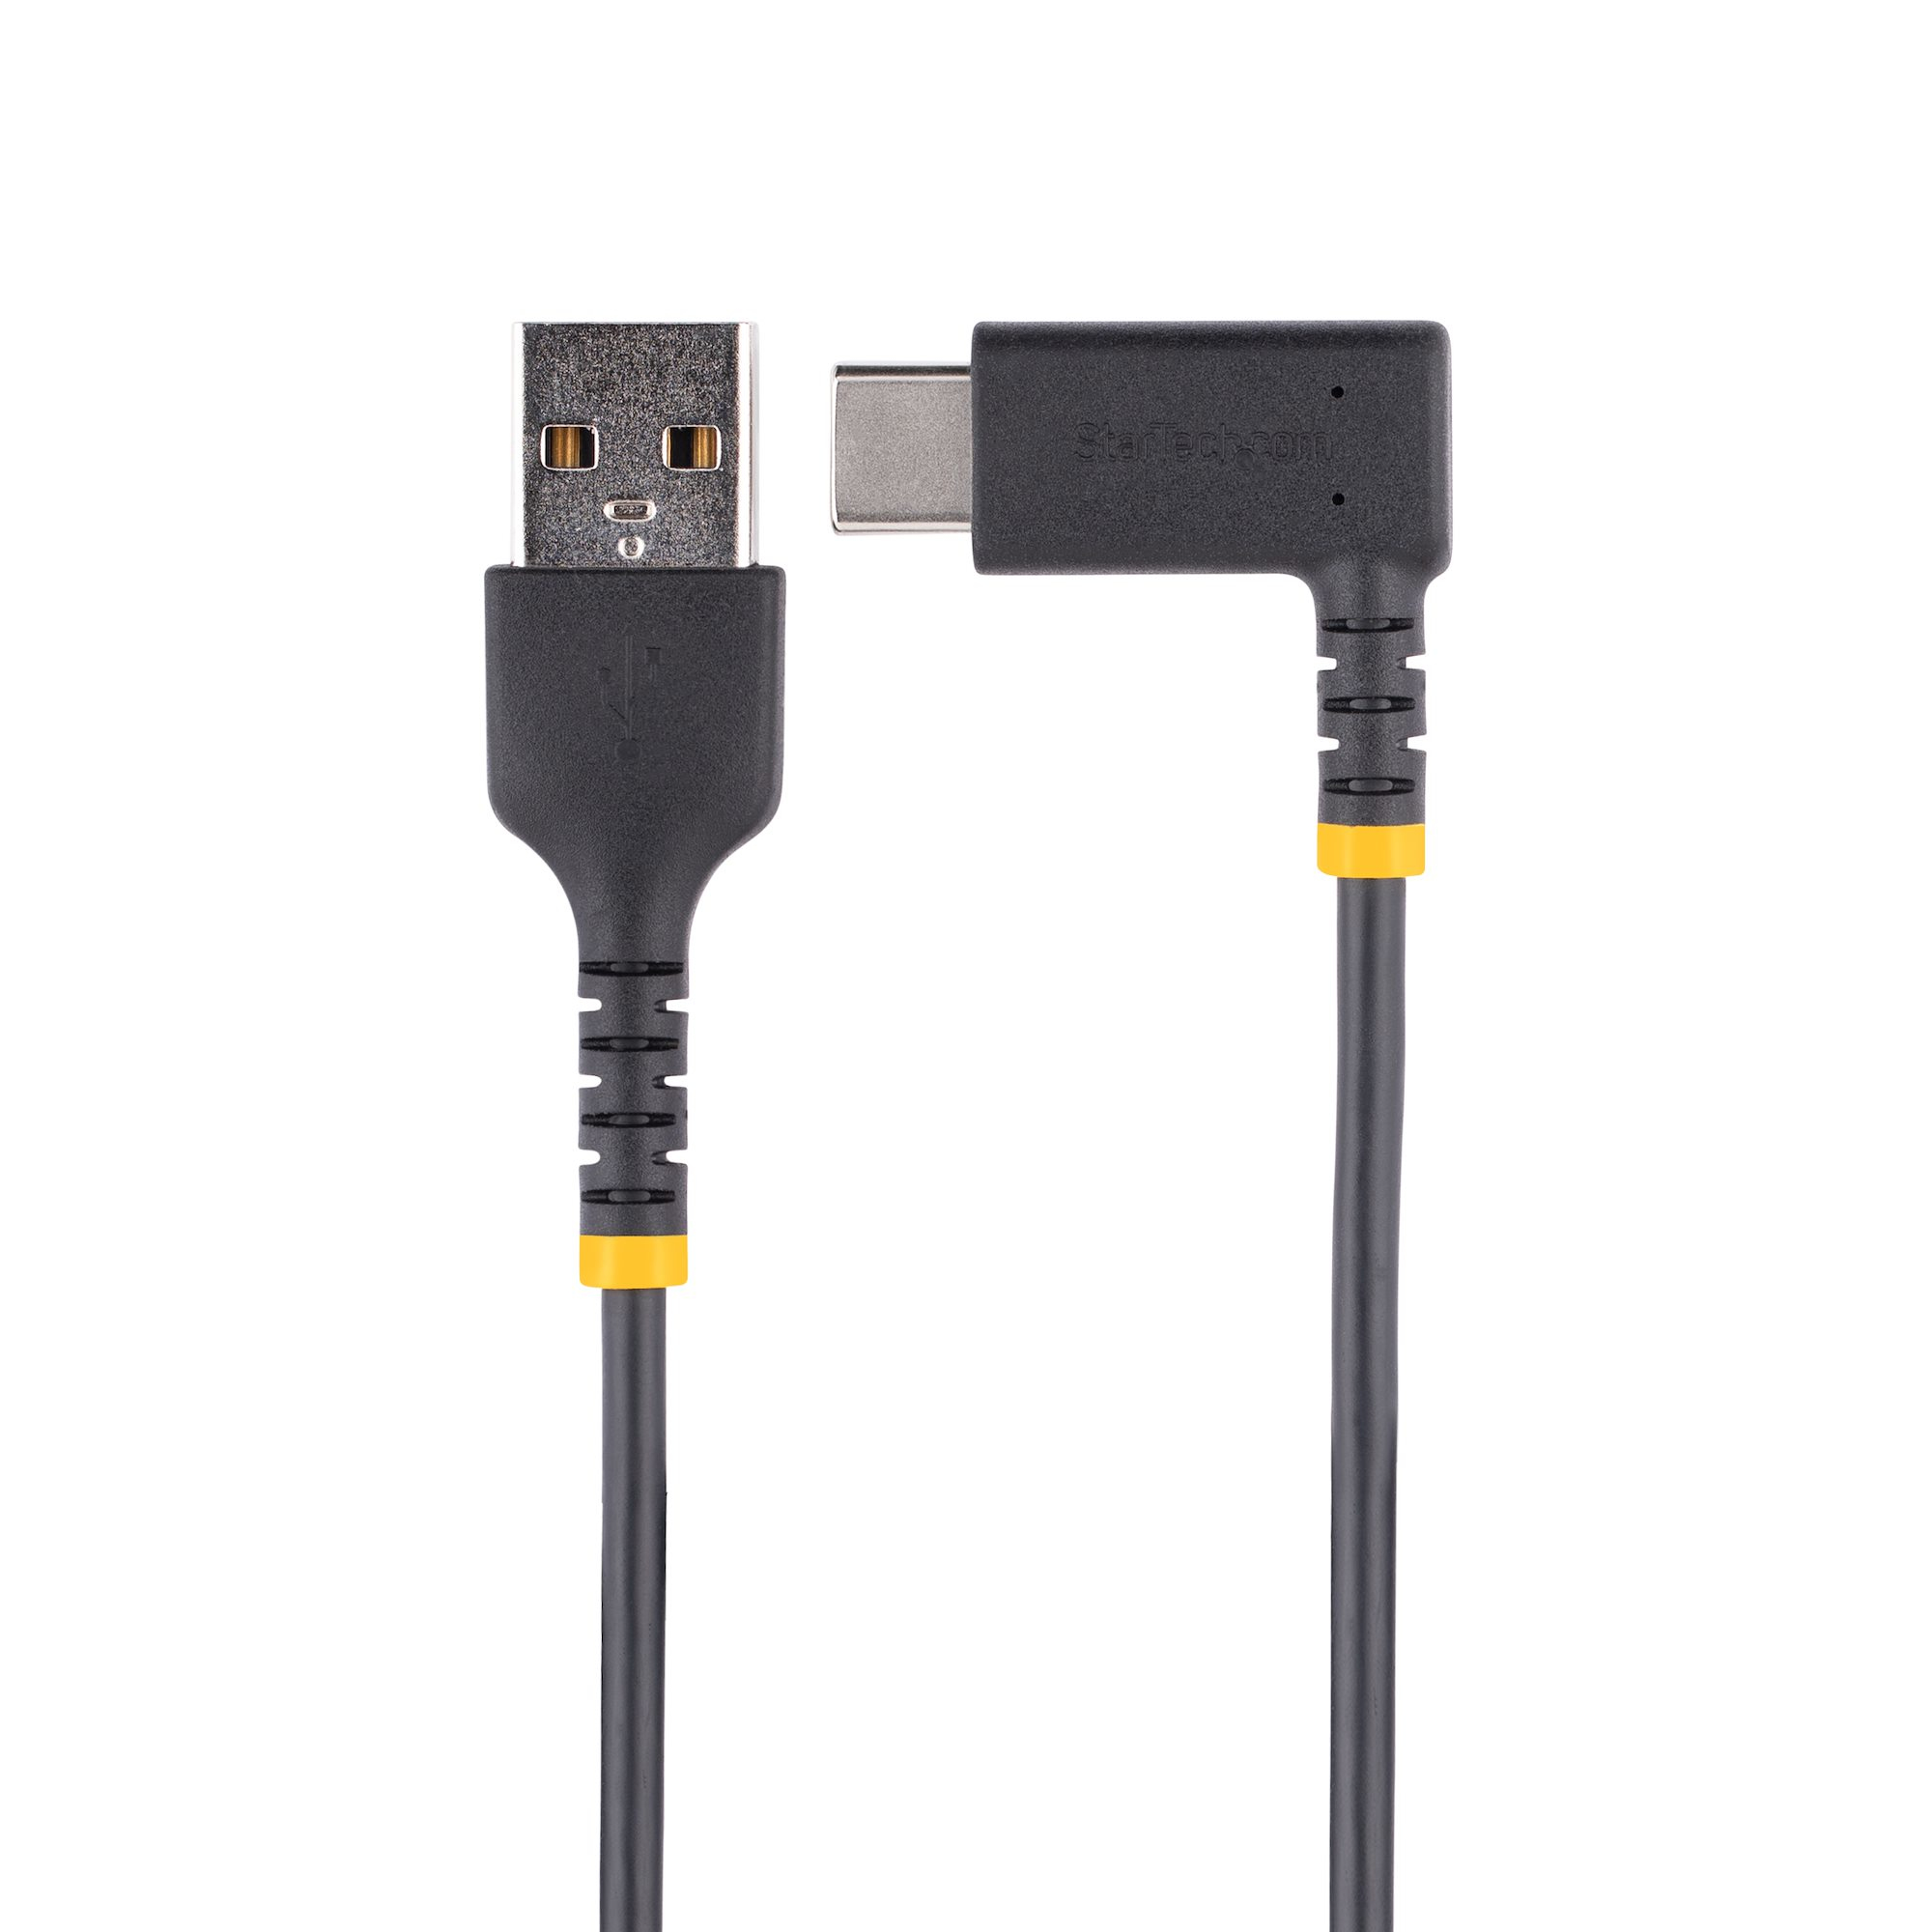 StarTech.com 2m USB 2.0 A to A Cable MM Connect USB 2.0 devices to